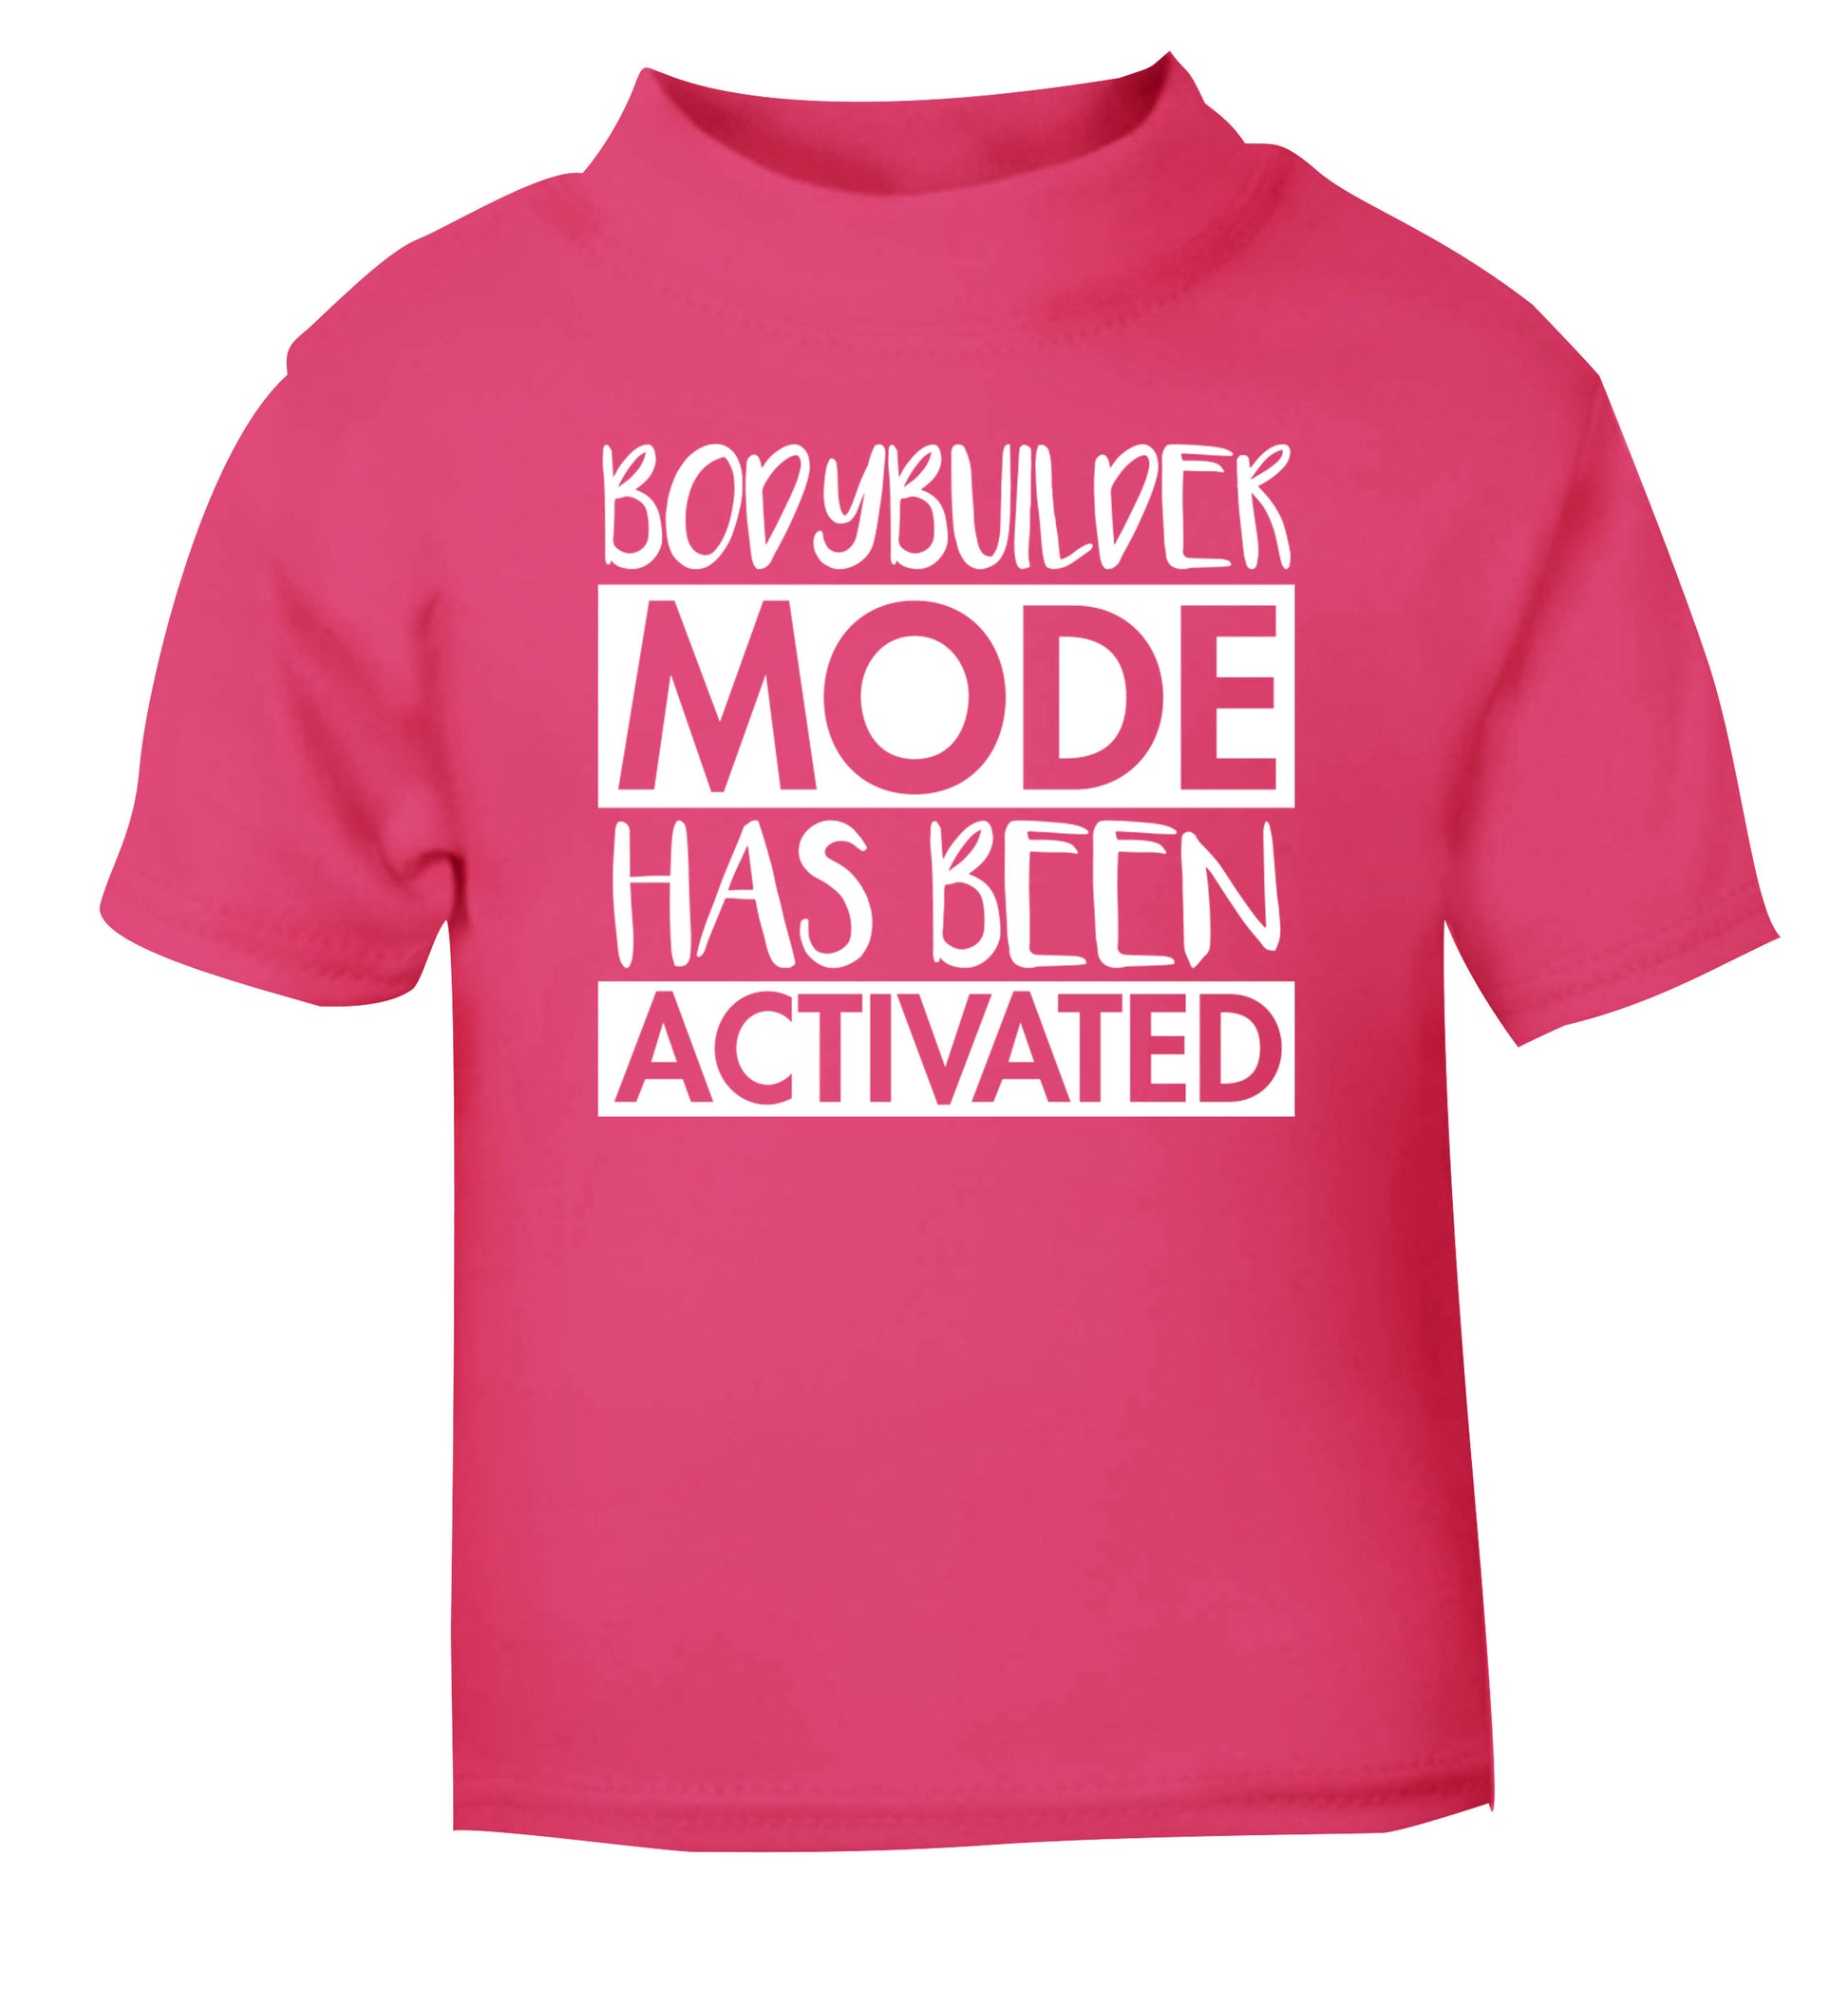 Bodybuilder mode activated pink Baby Toddler Tshirt 2 Years